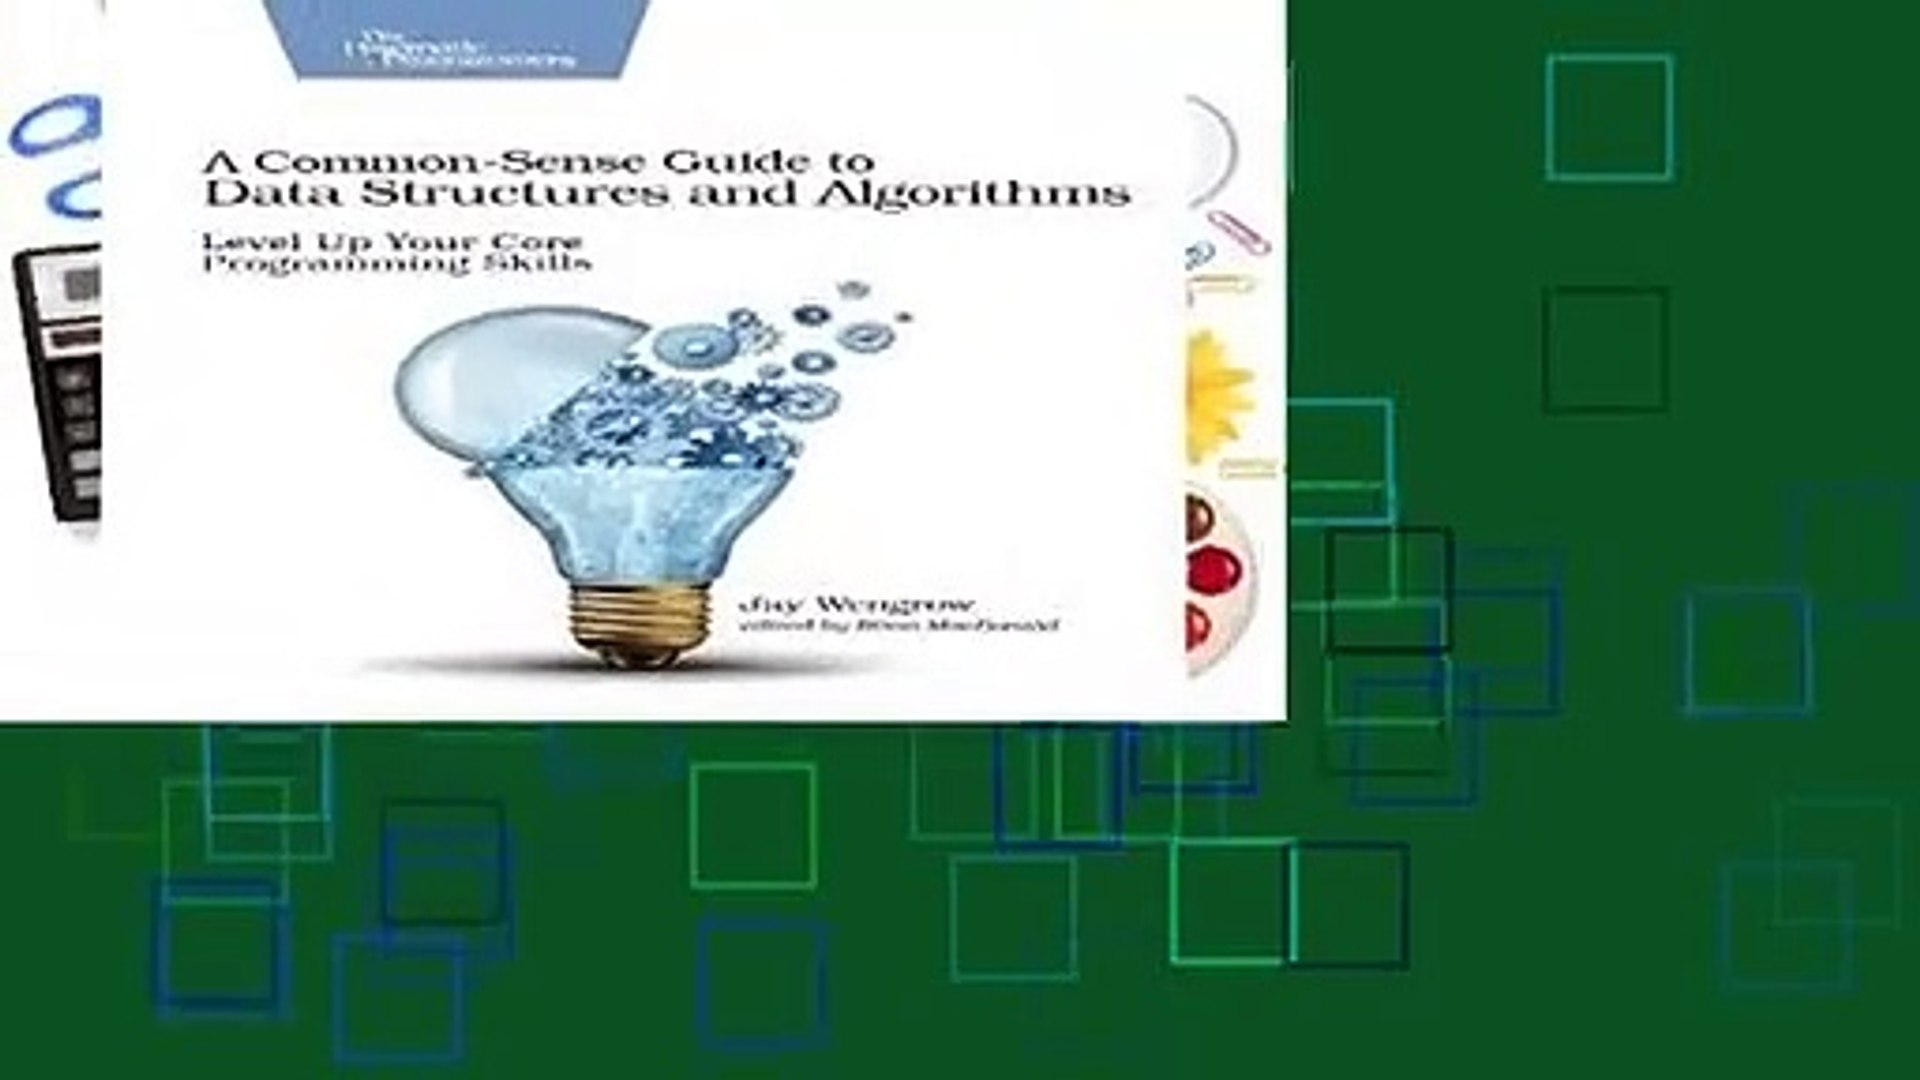 Common-Sense Guide to Data Structures and Algorithms, A  Review